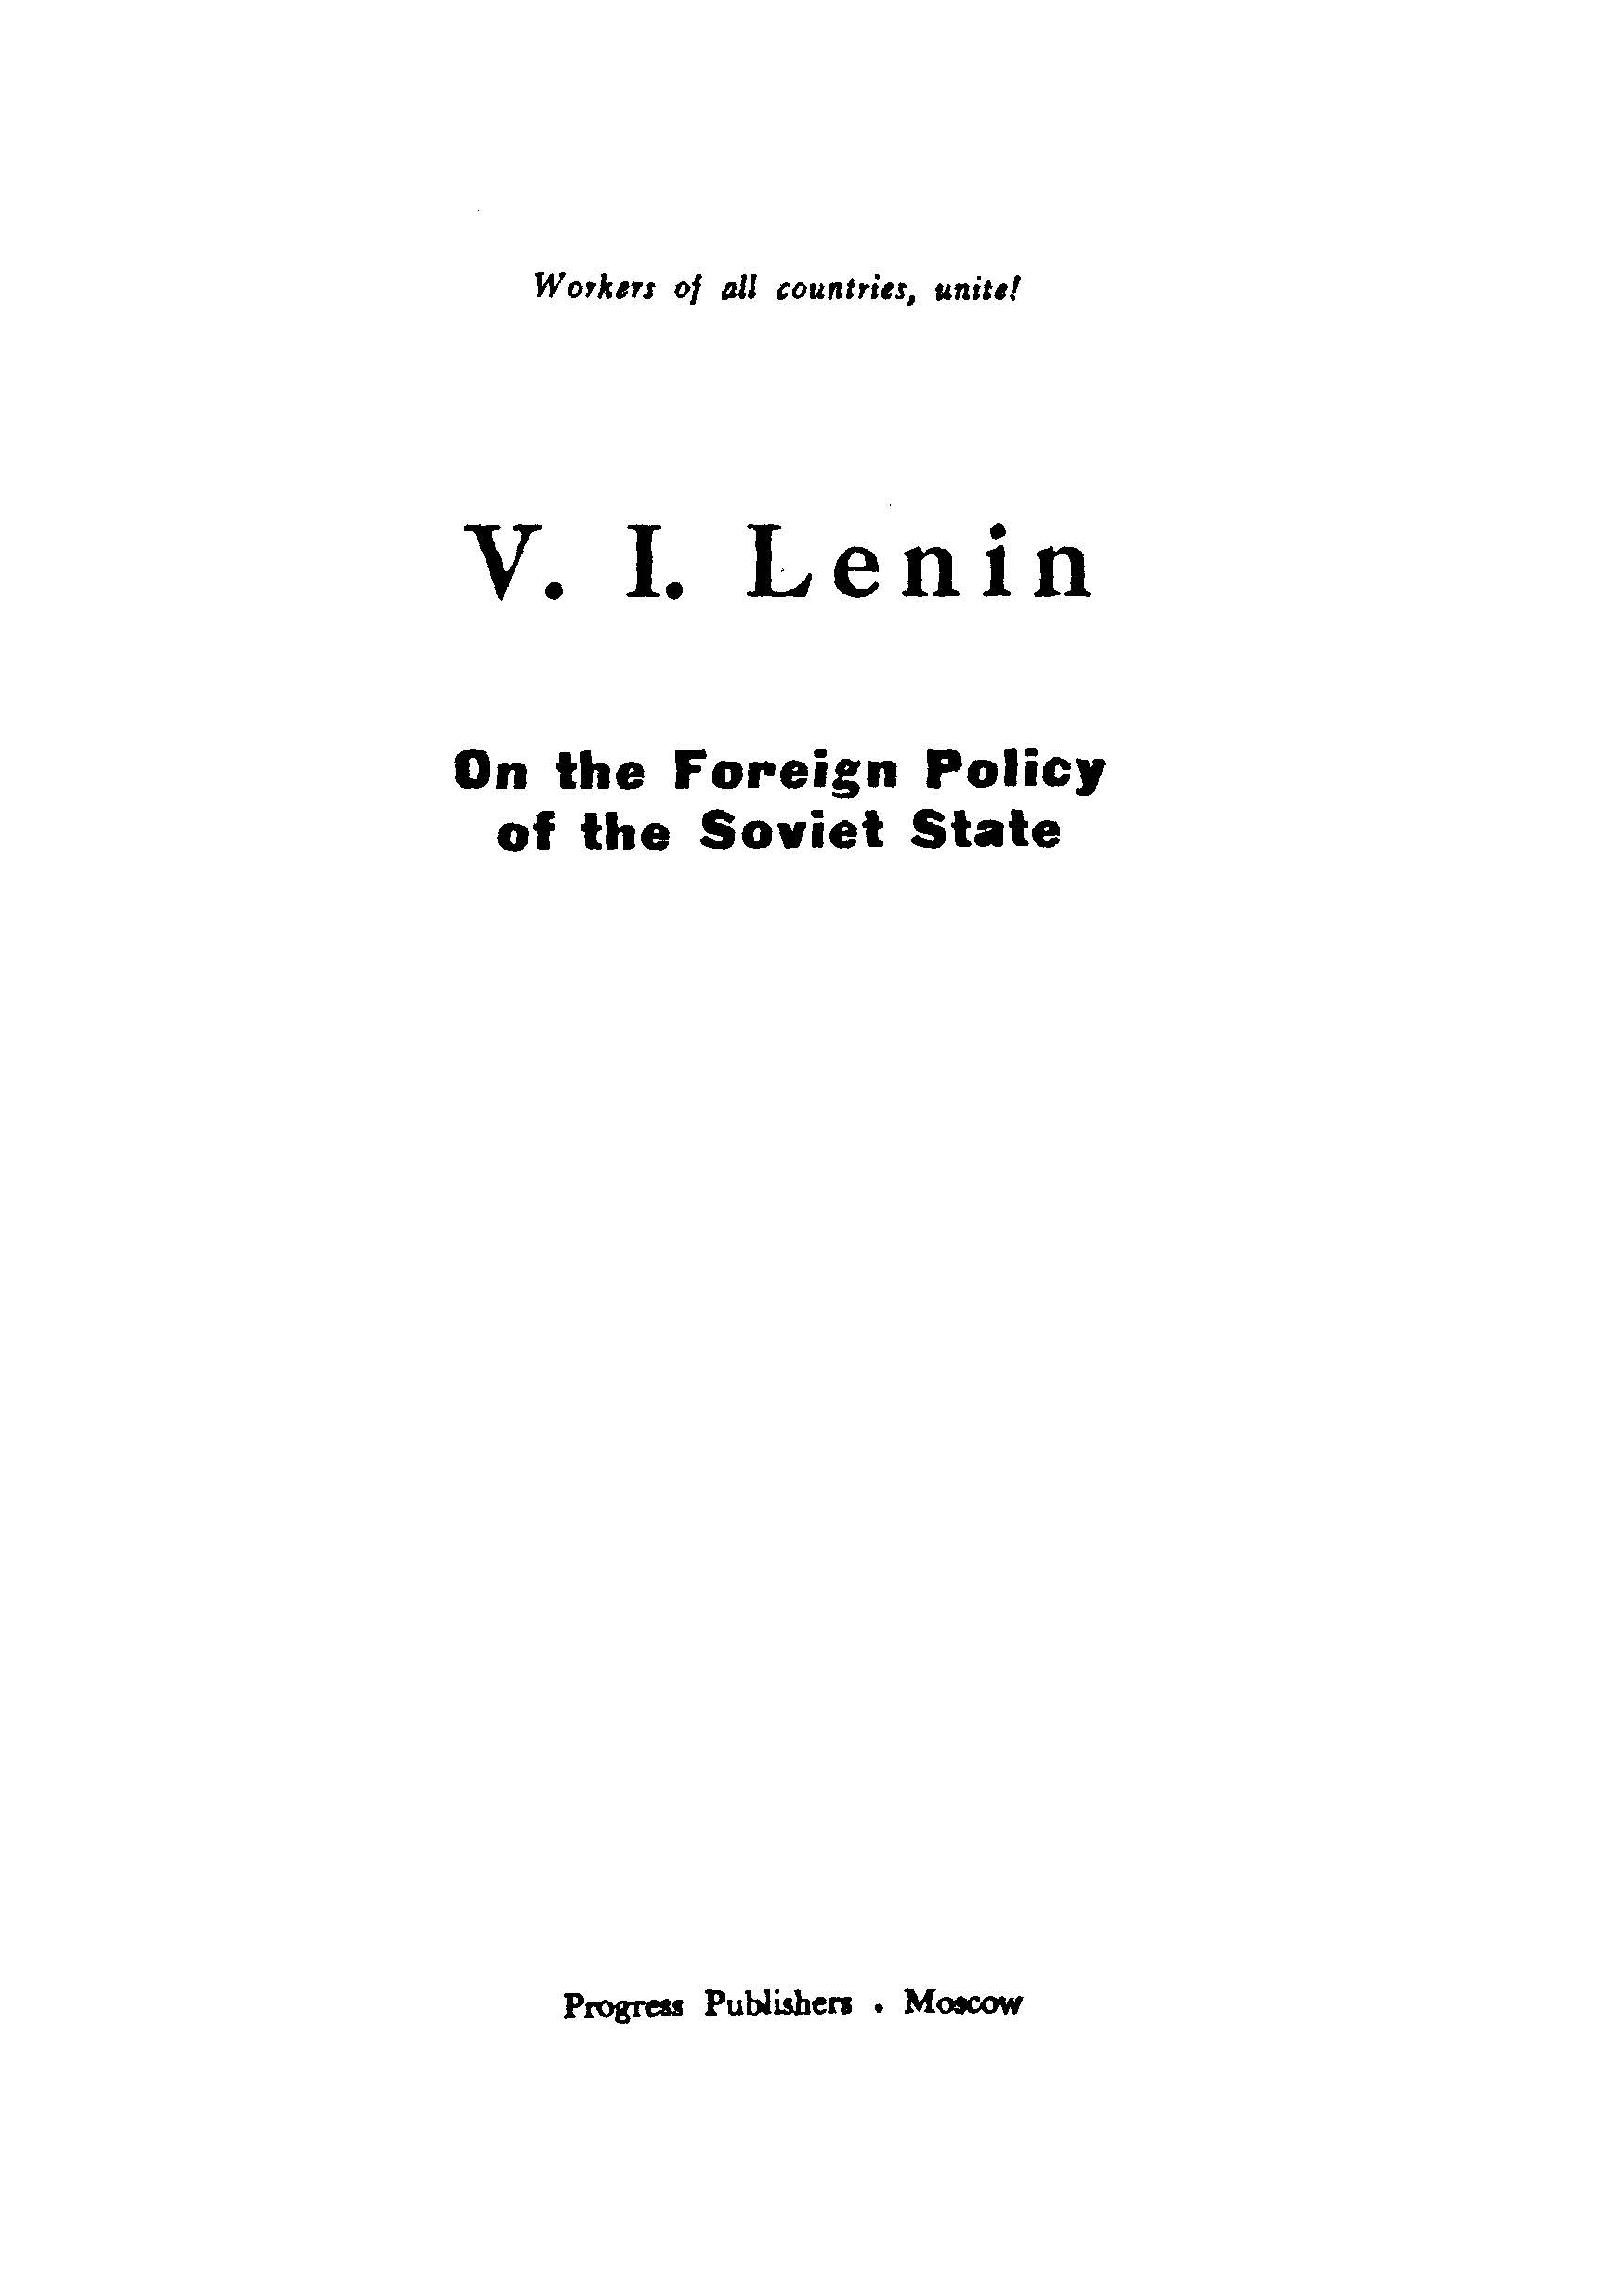 V.L.Lenin on the foreigh polity of the soviet state